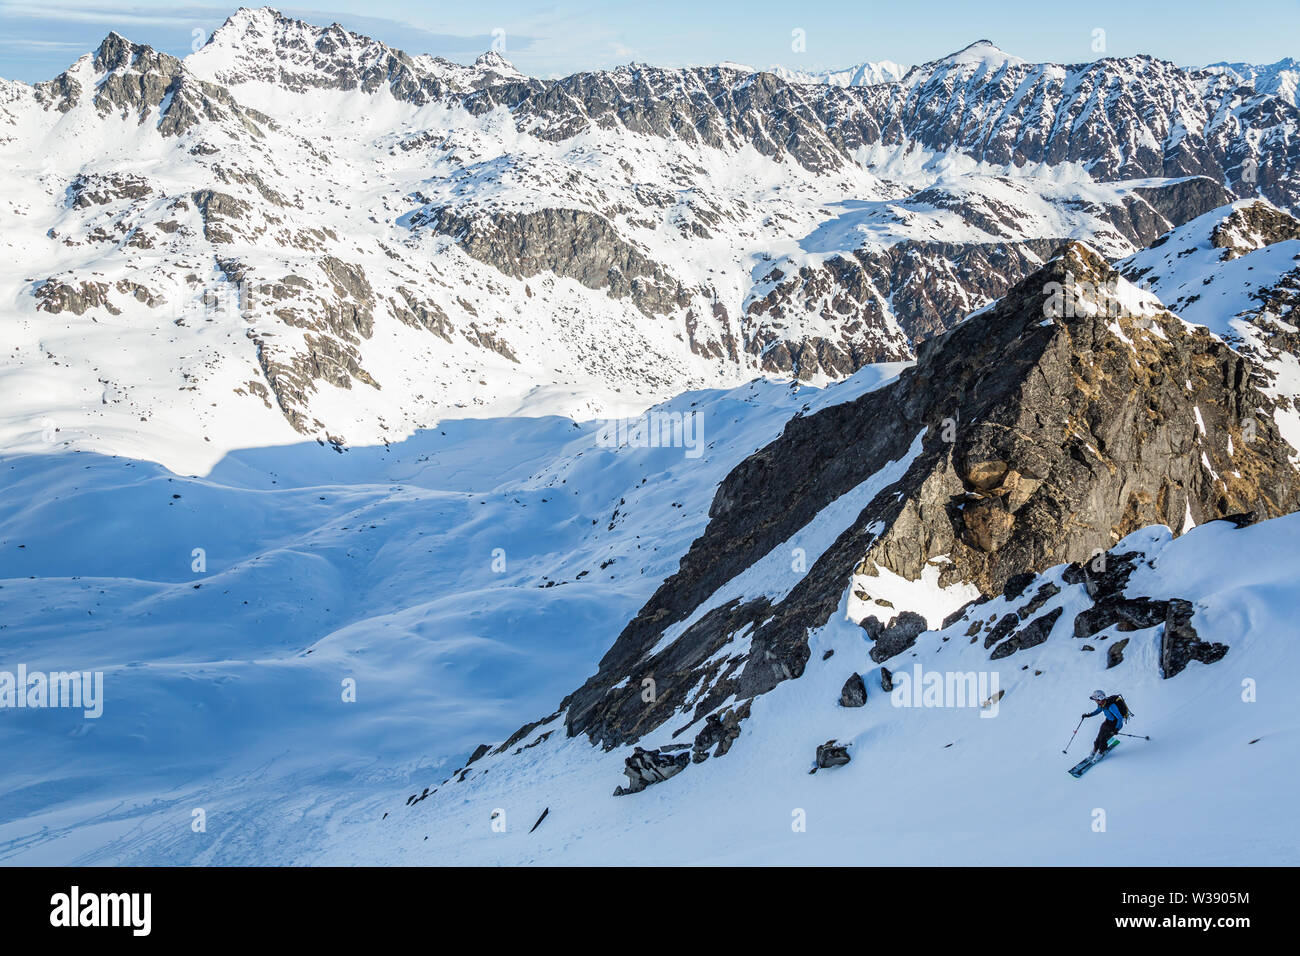 A skier drops into a steep  run on unknown terrain as he traverses mountains and valleys in the Talkeetna Mountains of remote Alaska. Stock Photo